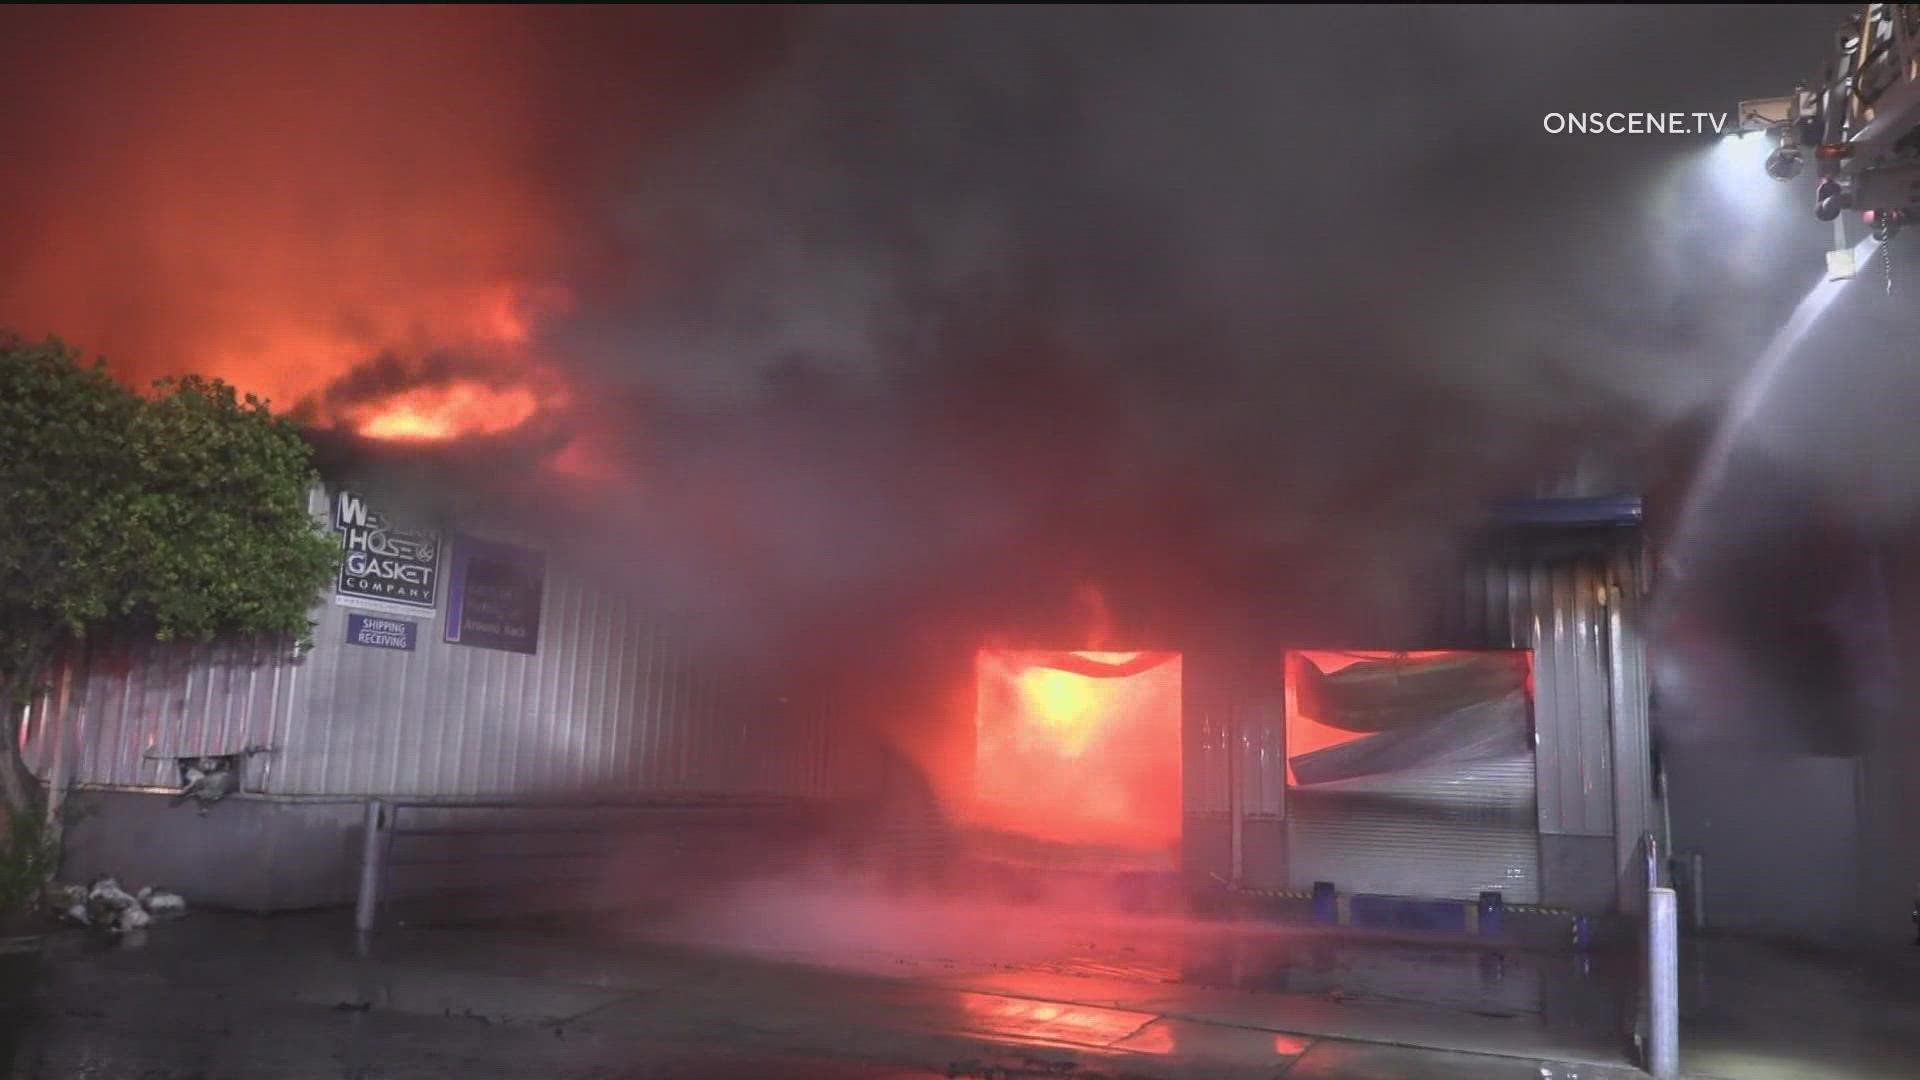 The Western Hose and Gasket building on Harding Avenue and 30th Street went up in flames at 11 pm on Monday.